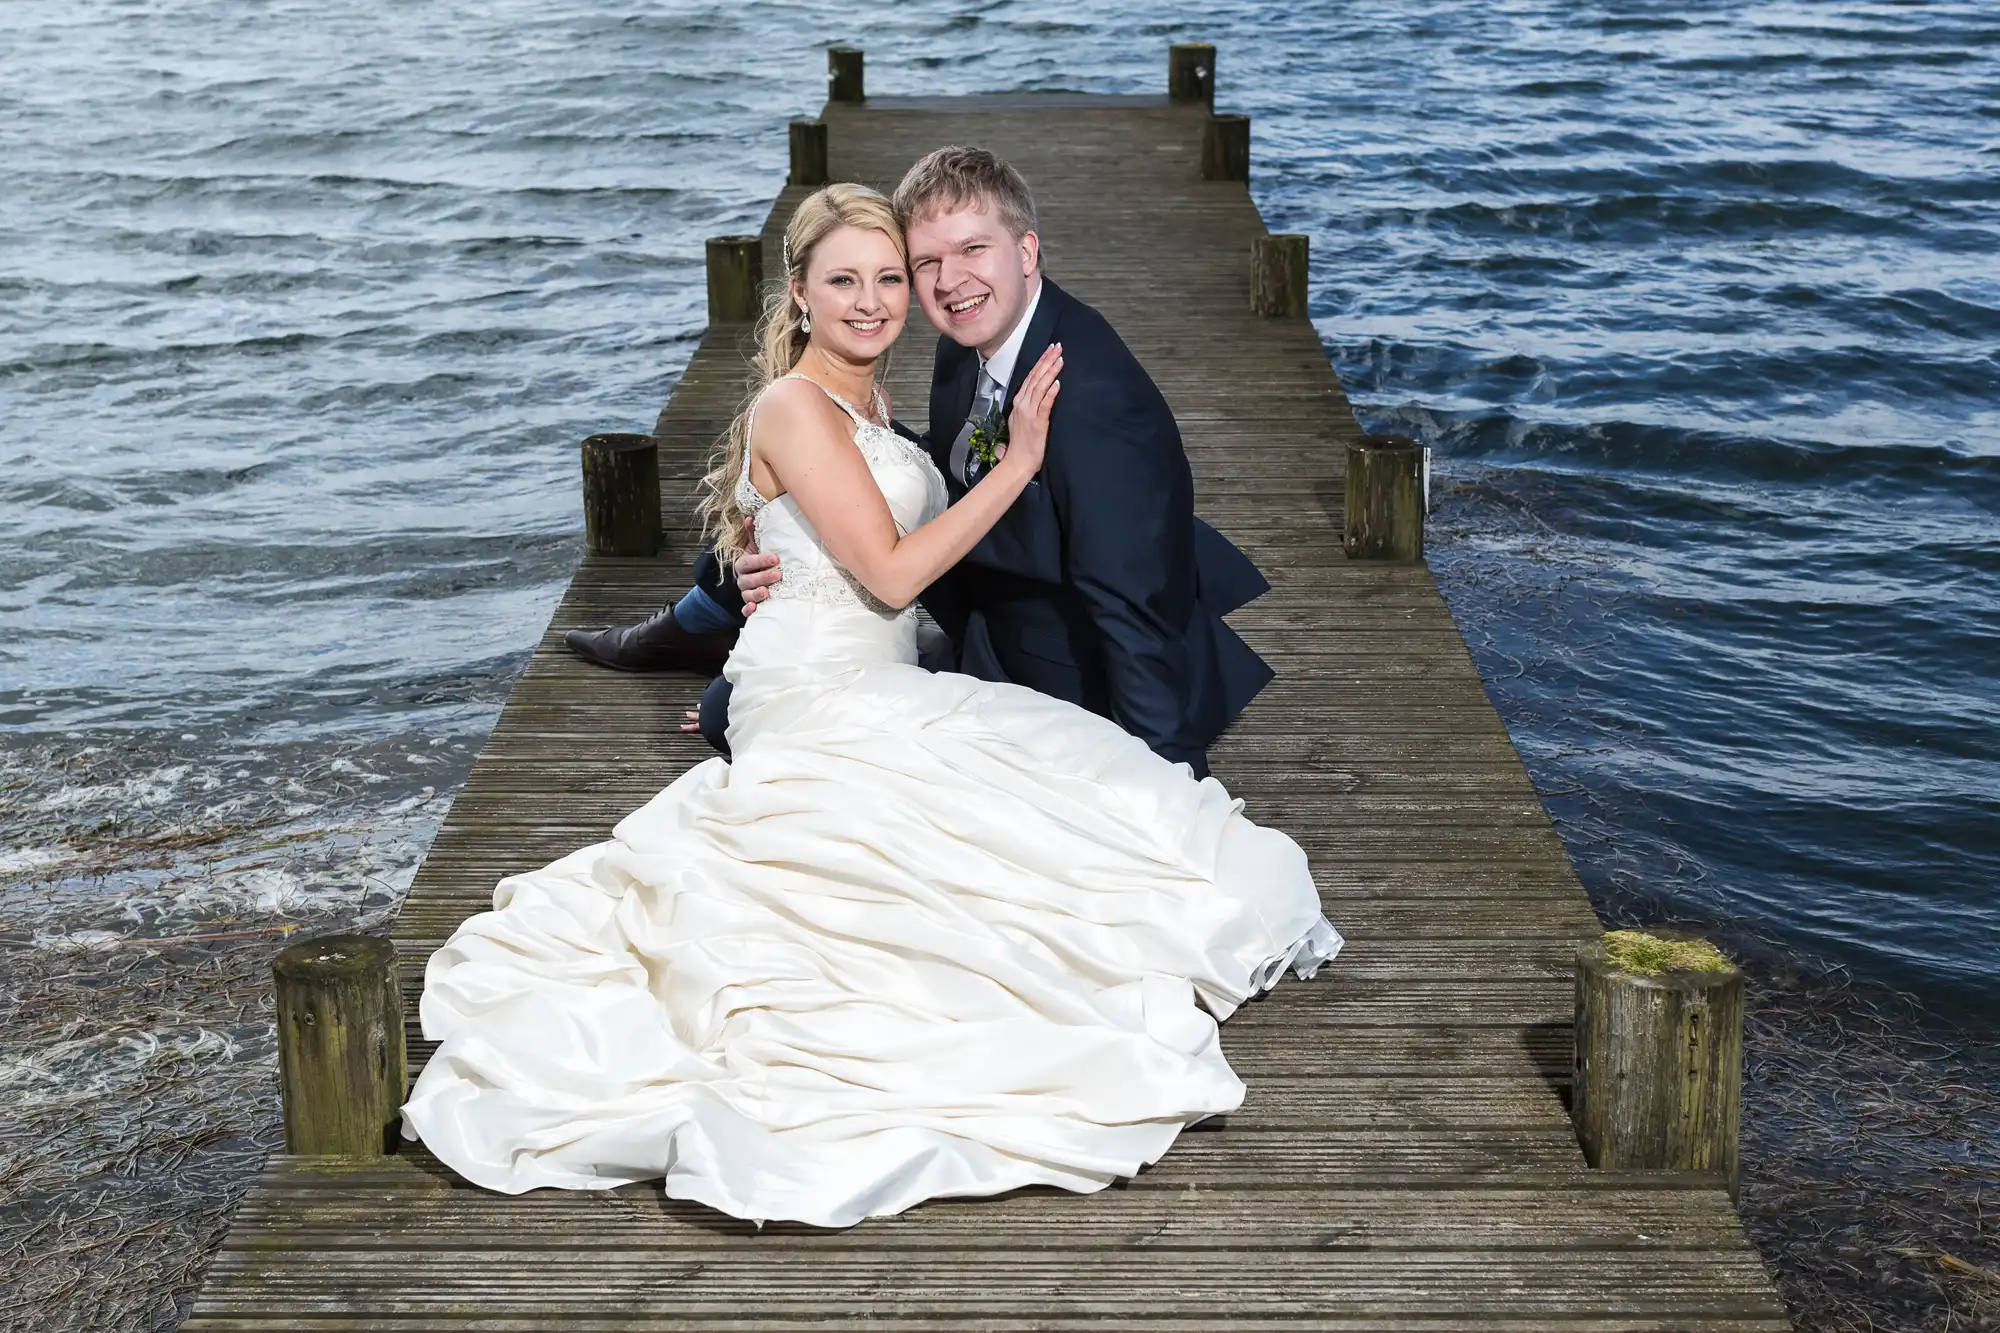 Bride and groom sitting on a wooden jetty by a lake, smiling at the camera, bride in a flowing white gown and groom in a dark suit.